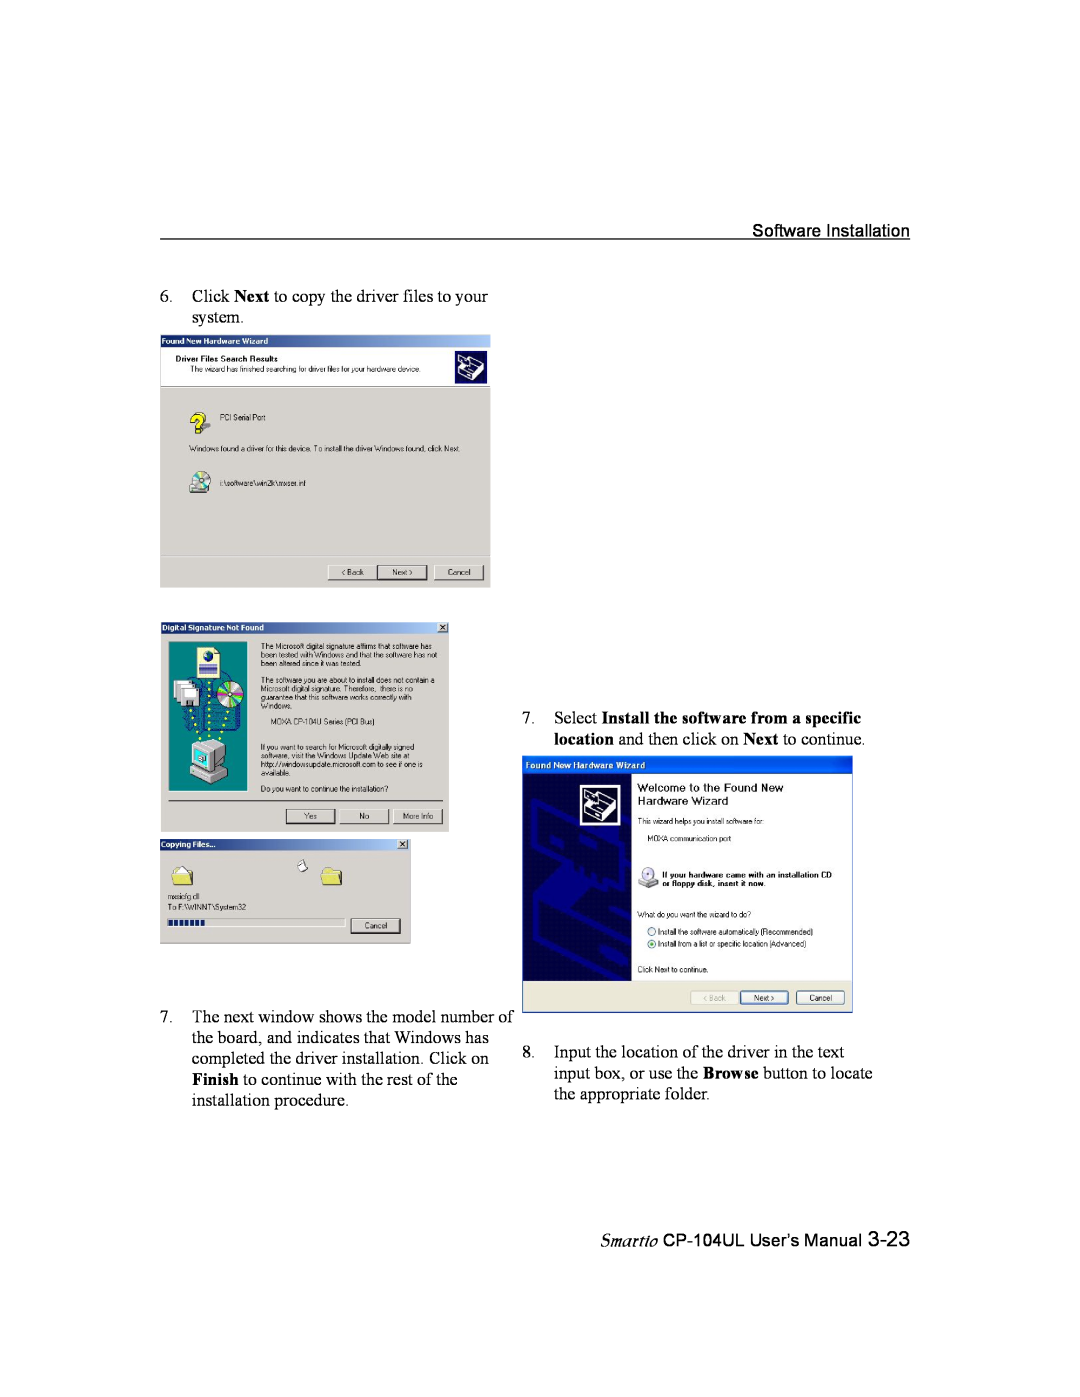 Moxa Technologies CP-104UL user manual Click Next to copy the driver files to your system 